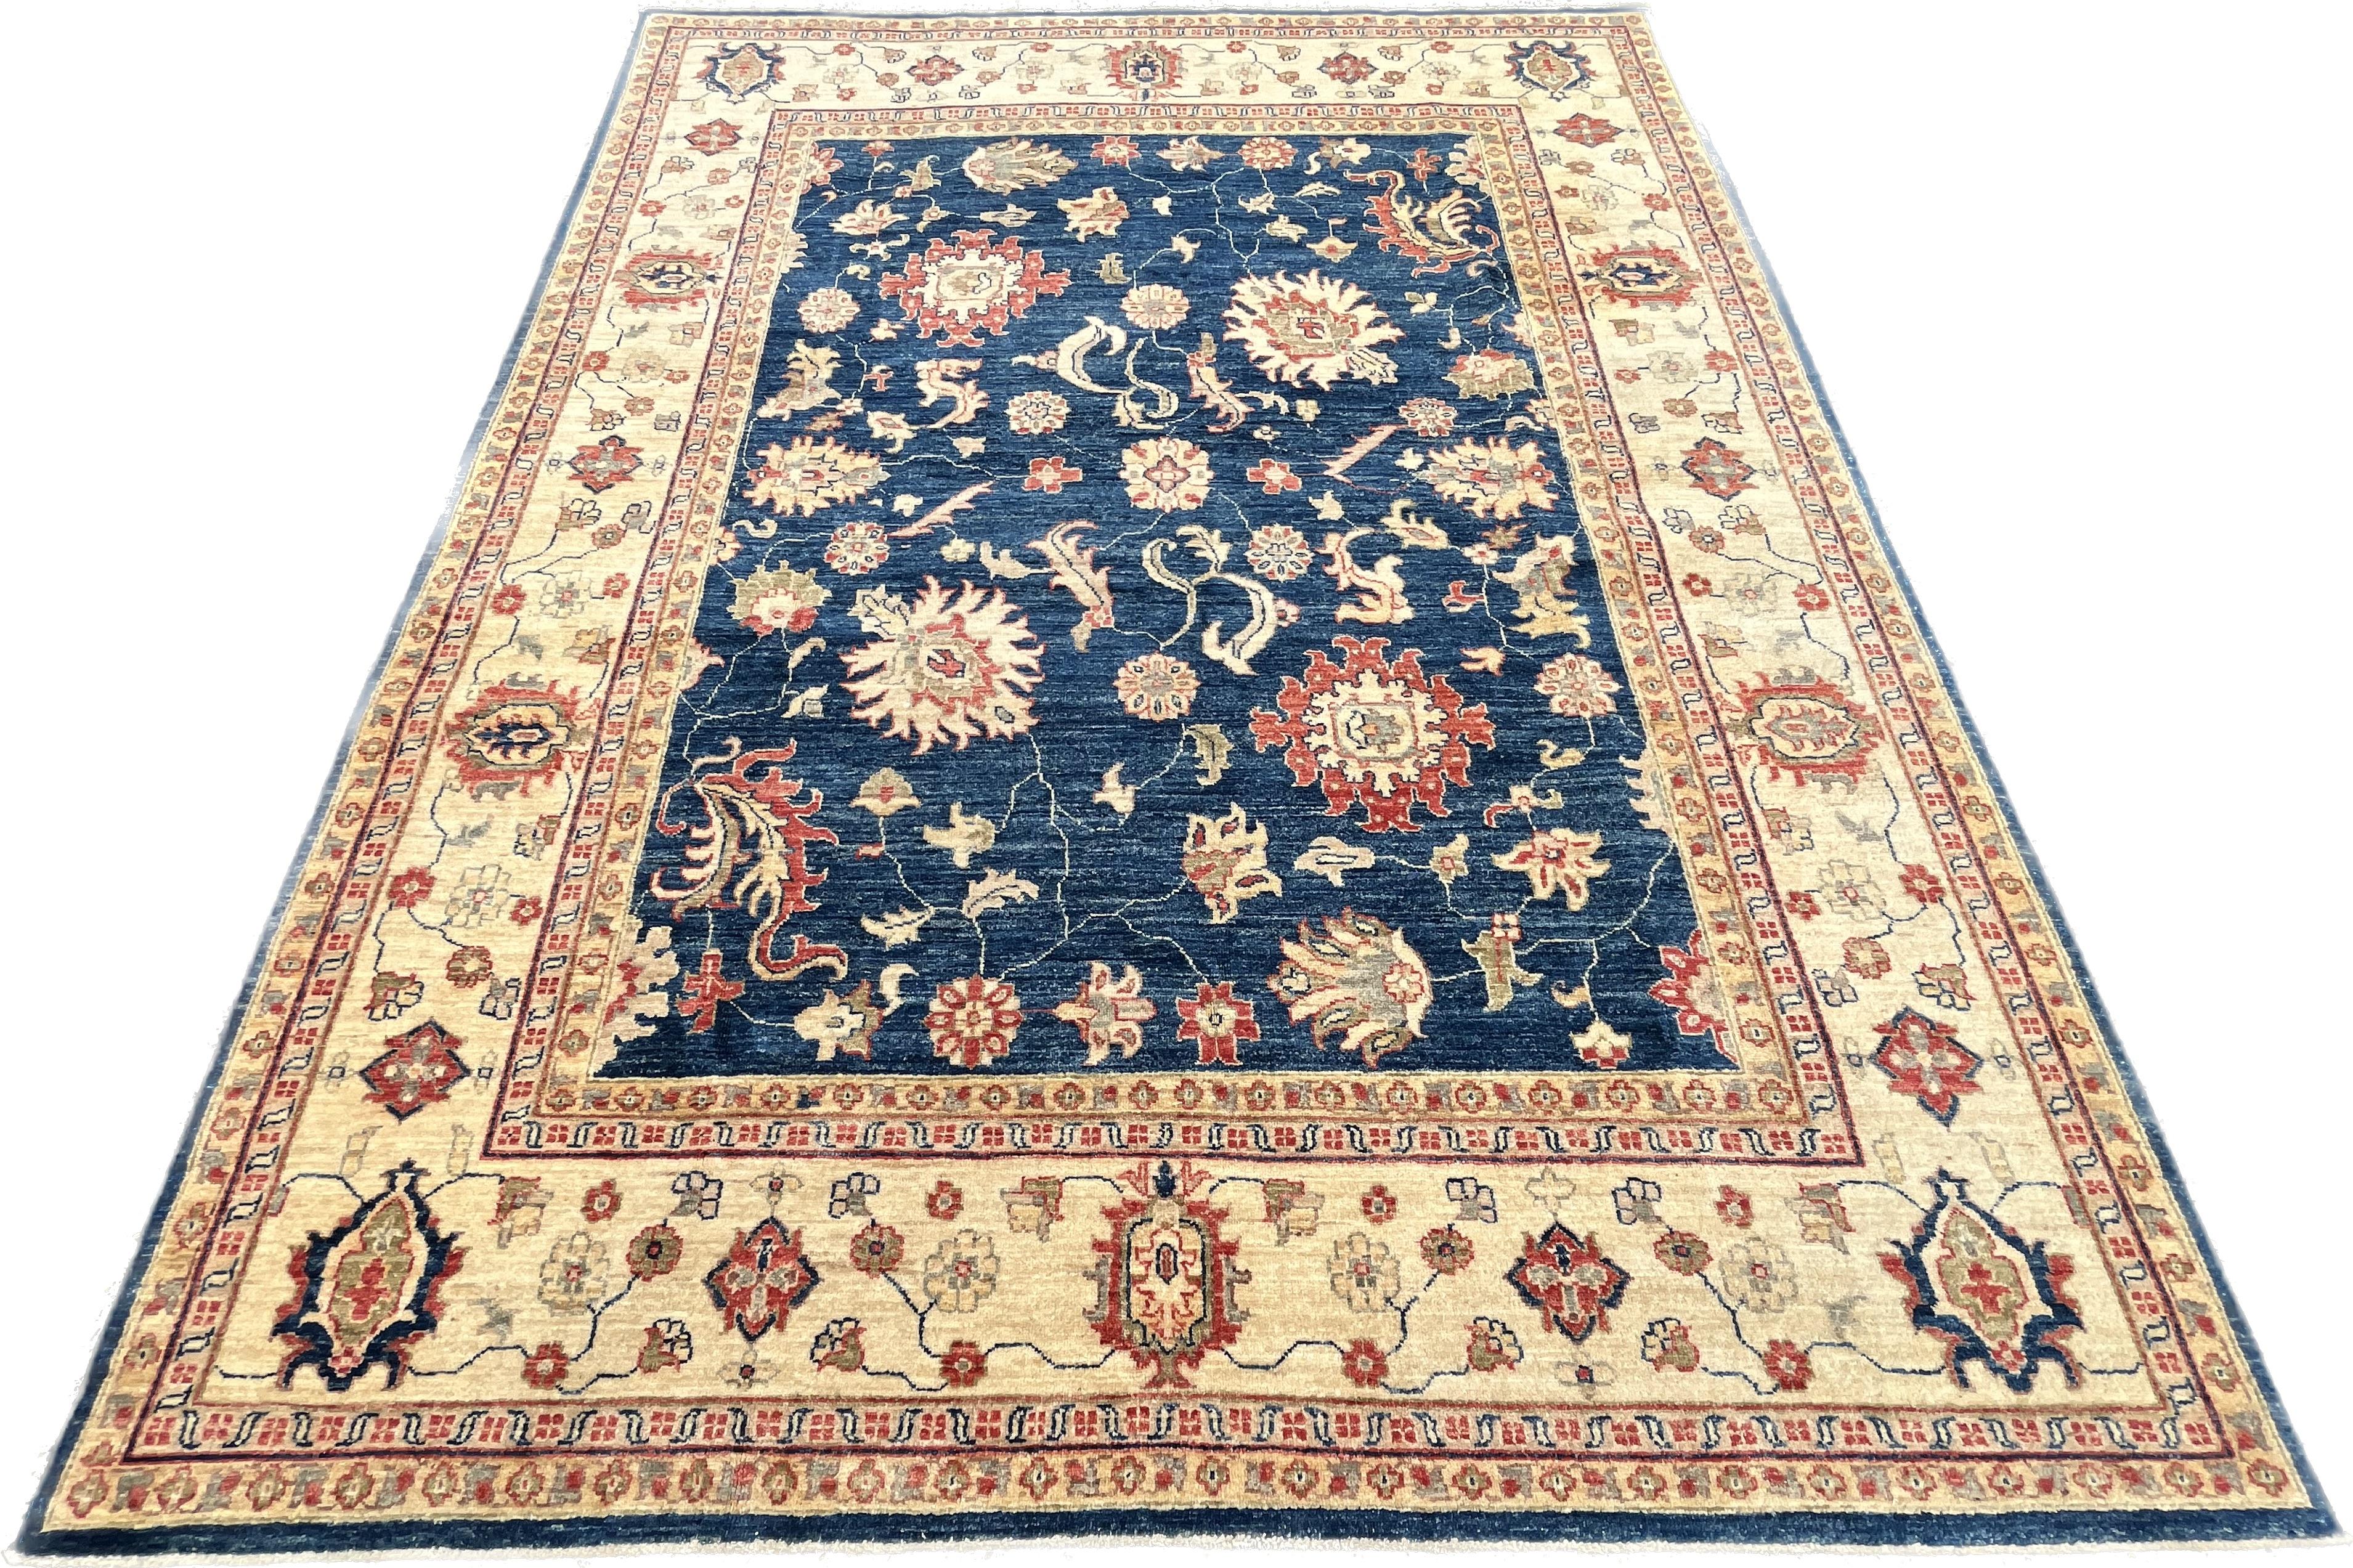 Oriental rugs  Ziegler
Ziegler Afghan handmade wool rug circa 1960.

19th century design rug, beautifully made using a fine weave and delicate pattern.
This is a Ziegler rug, of a rare and timeless style. Very low cut hairs give you different shades